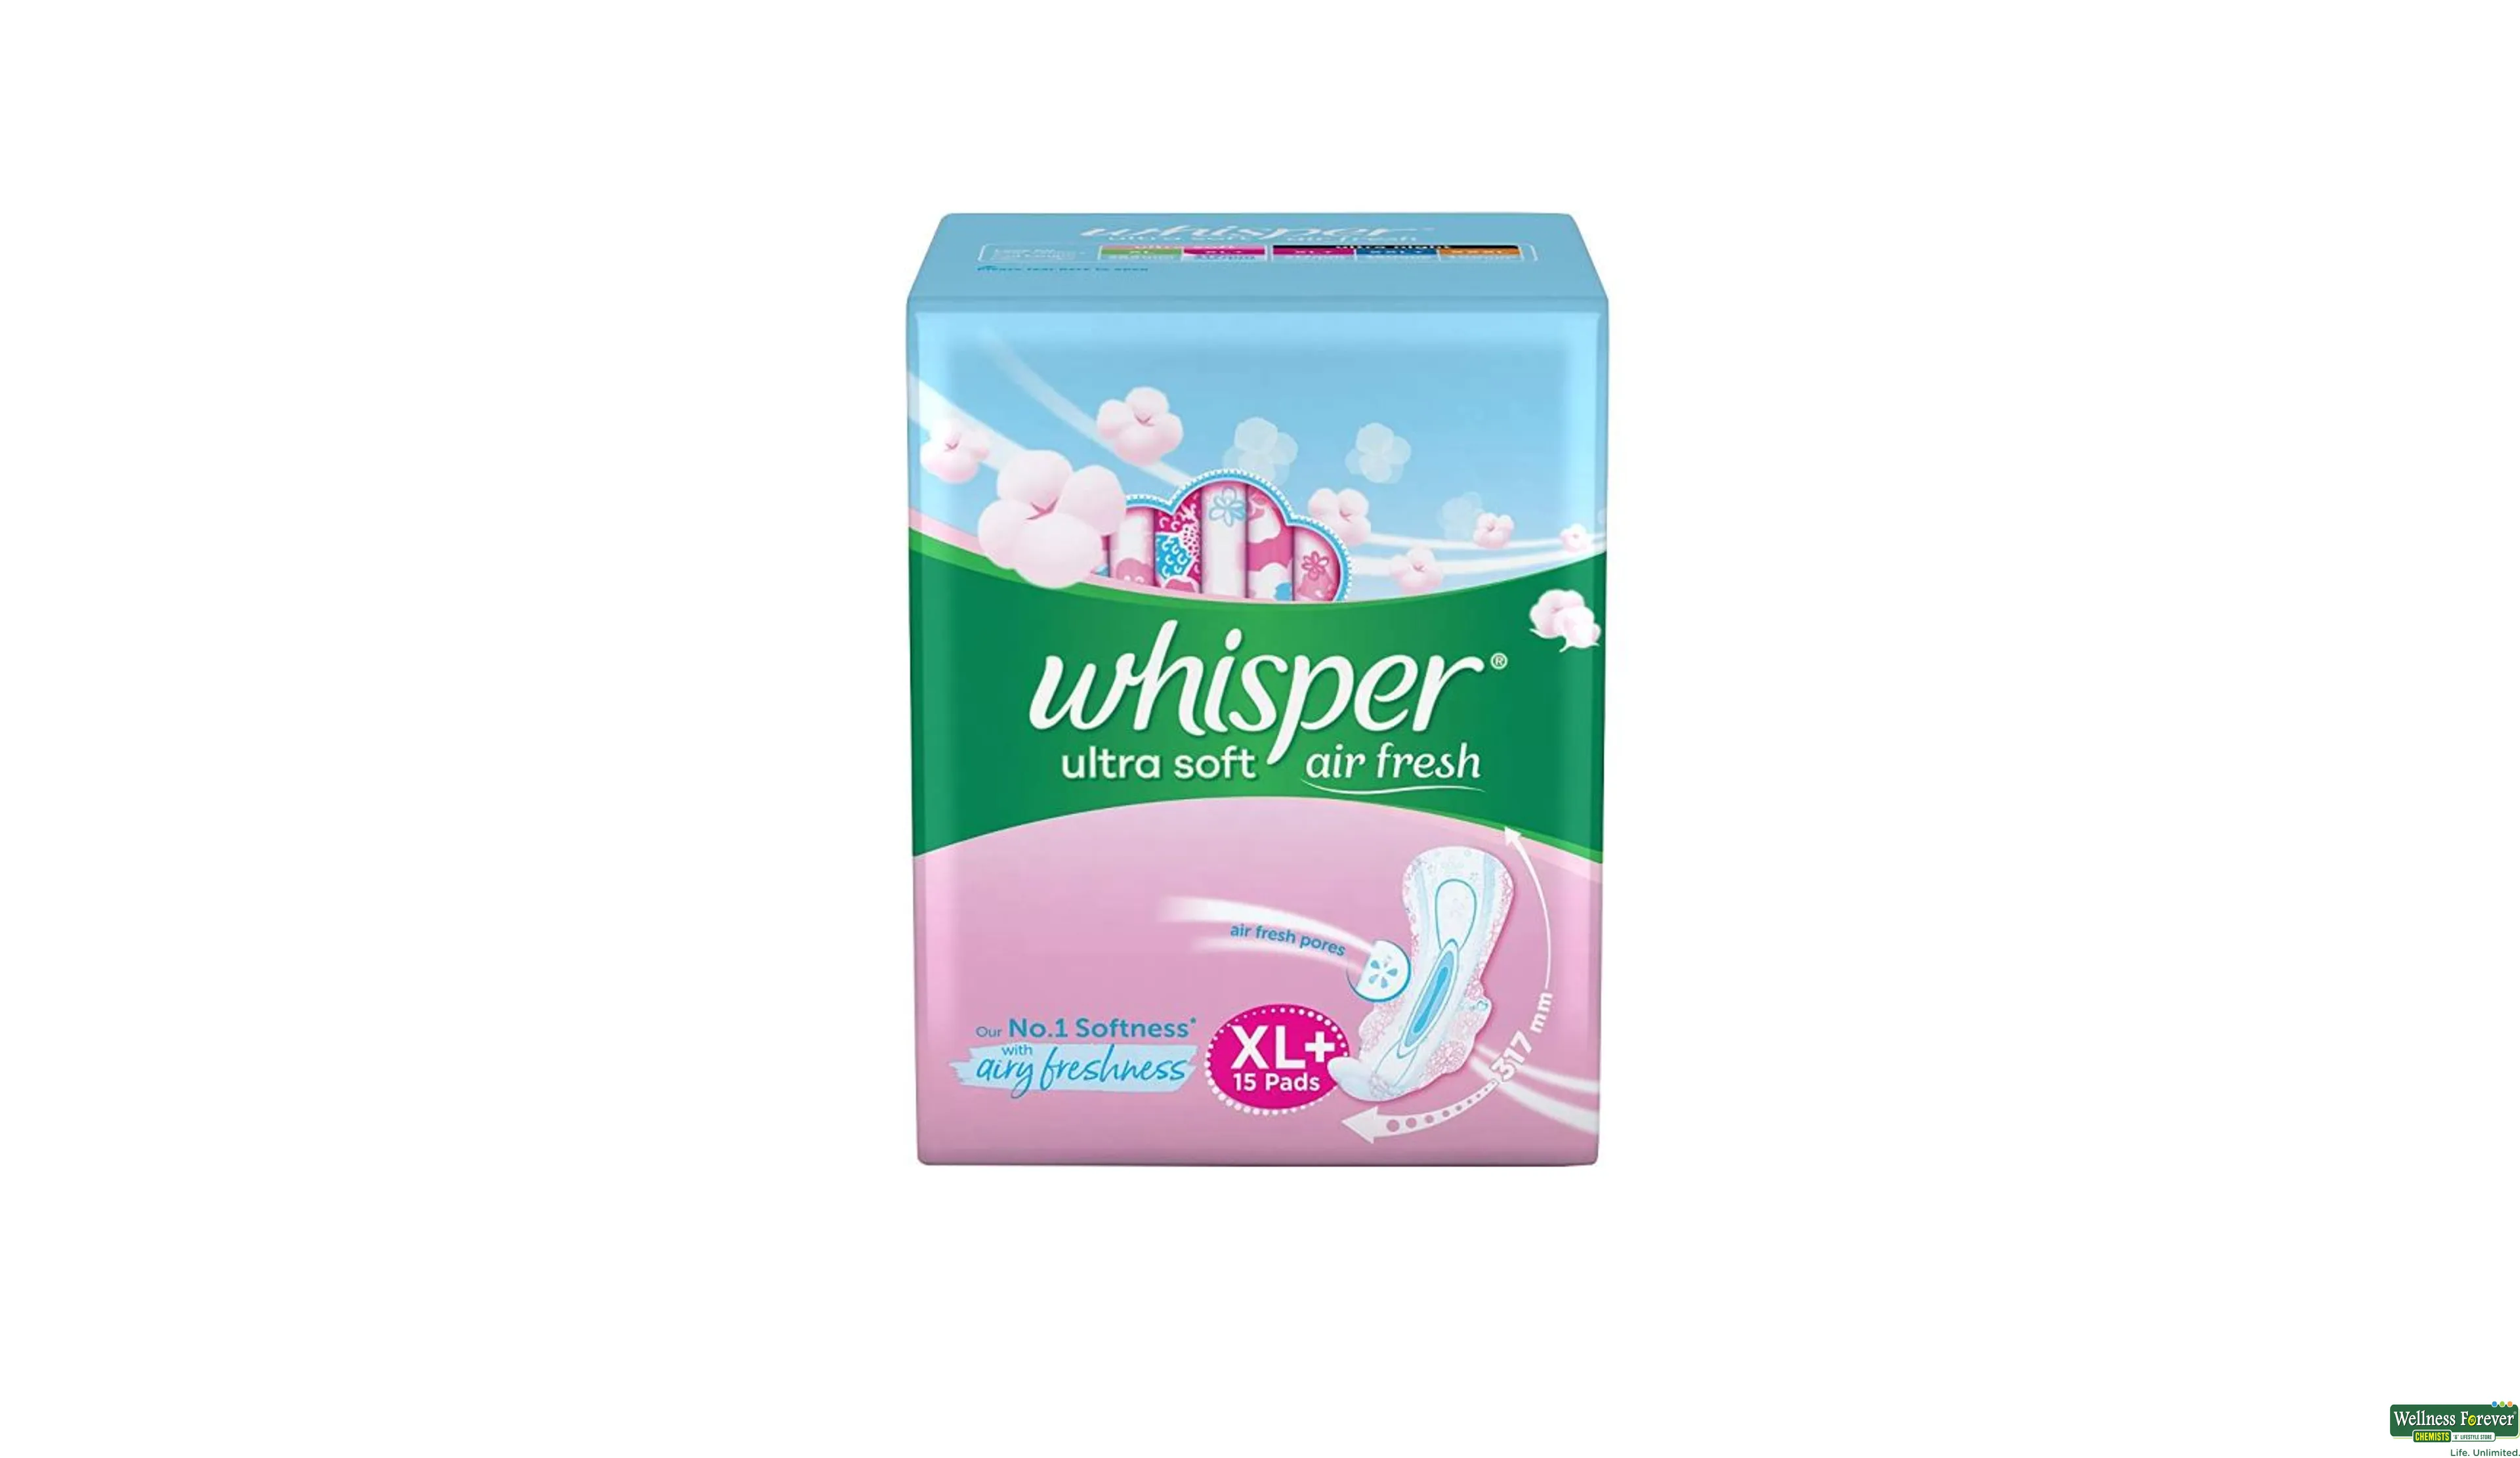 Whisper Ultra Clean Sanitary Pads For Women, X-Large +, Pack of 50 Napkins  us